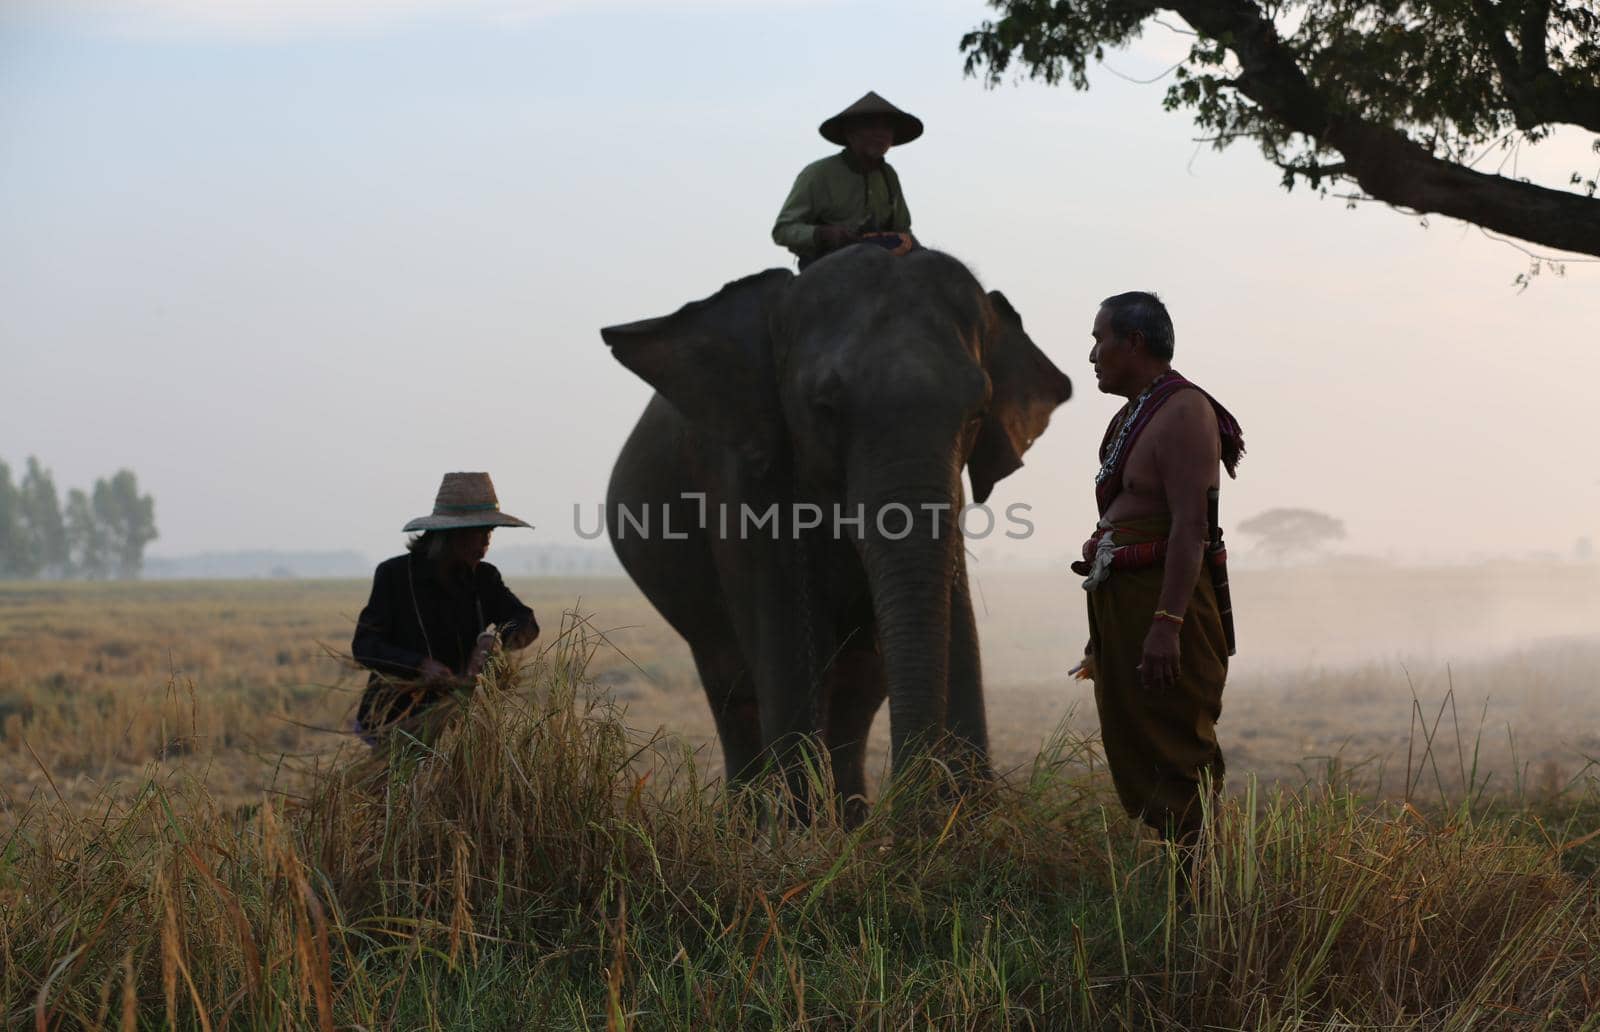 Farmers in Thailand.
Thailand Countryside; Silhouette elephant on the background of sunset, elephant Thai in Surin Thailand.